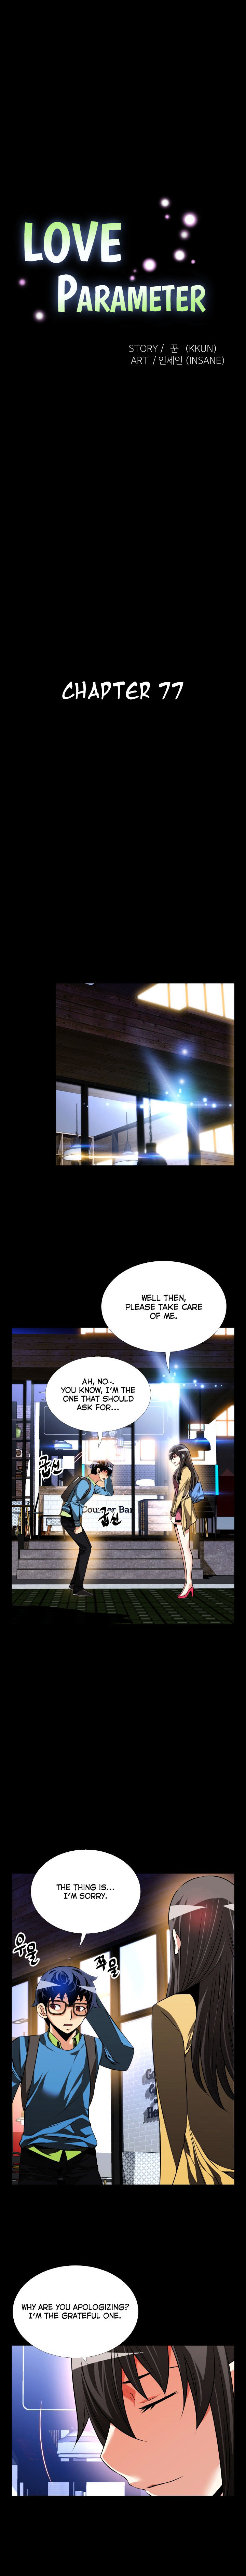 Love Parameter - Chapter 77 Page 4